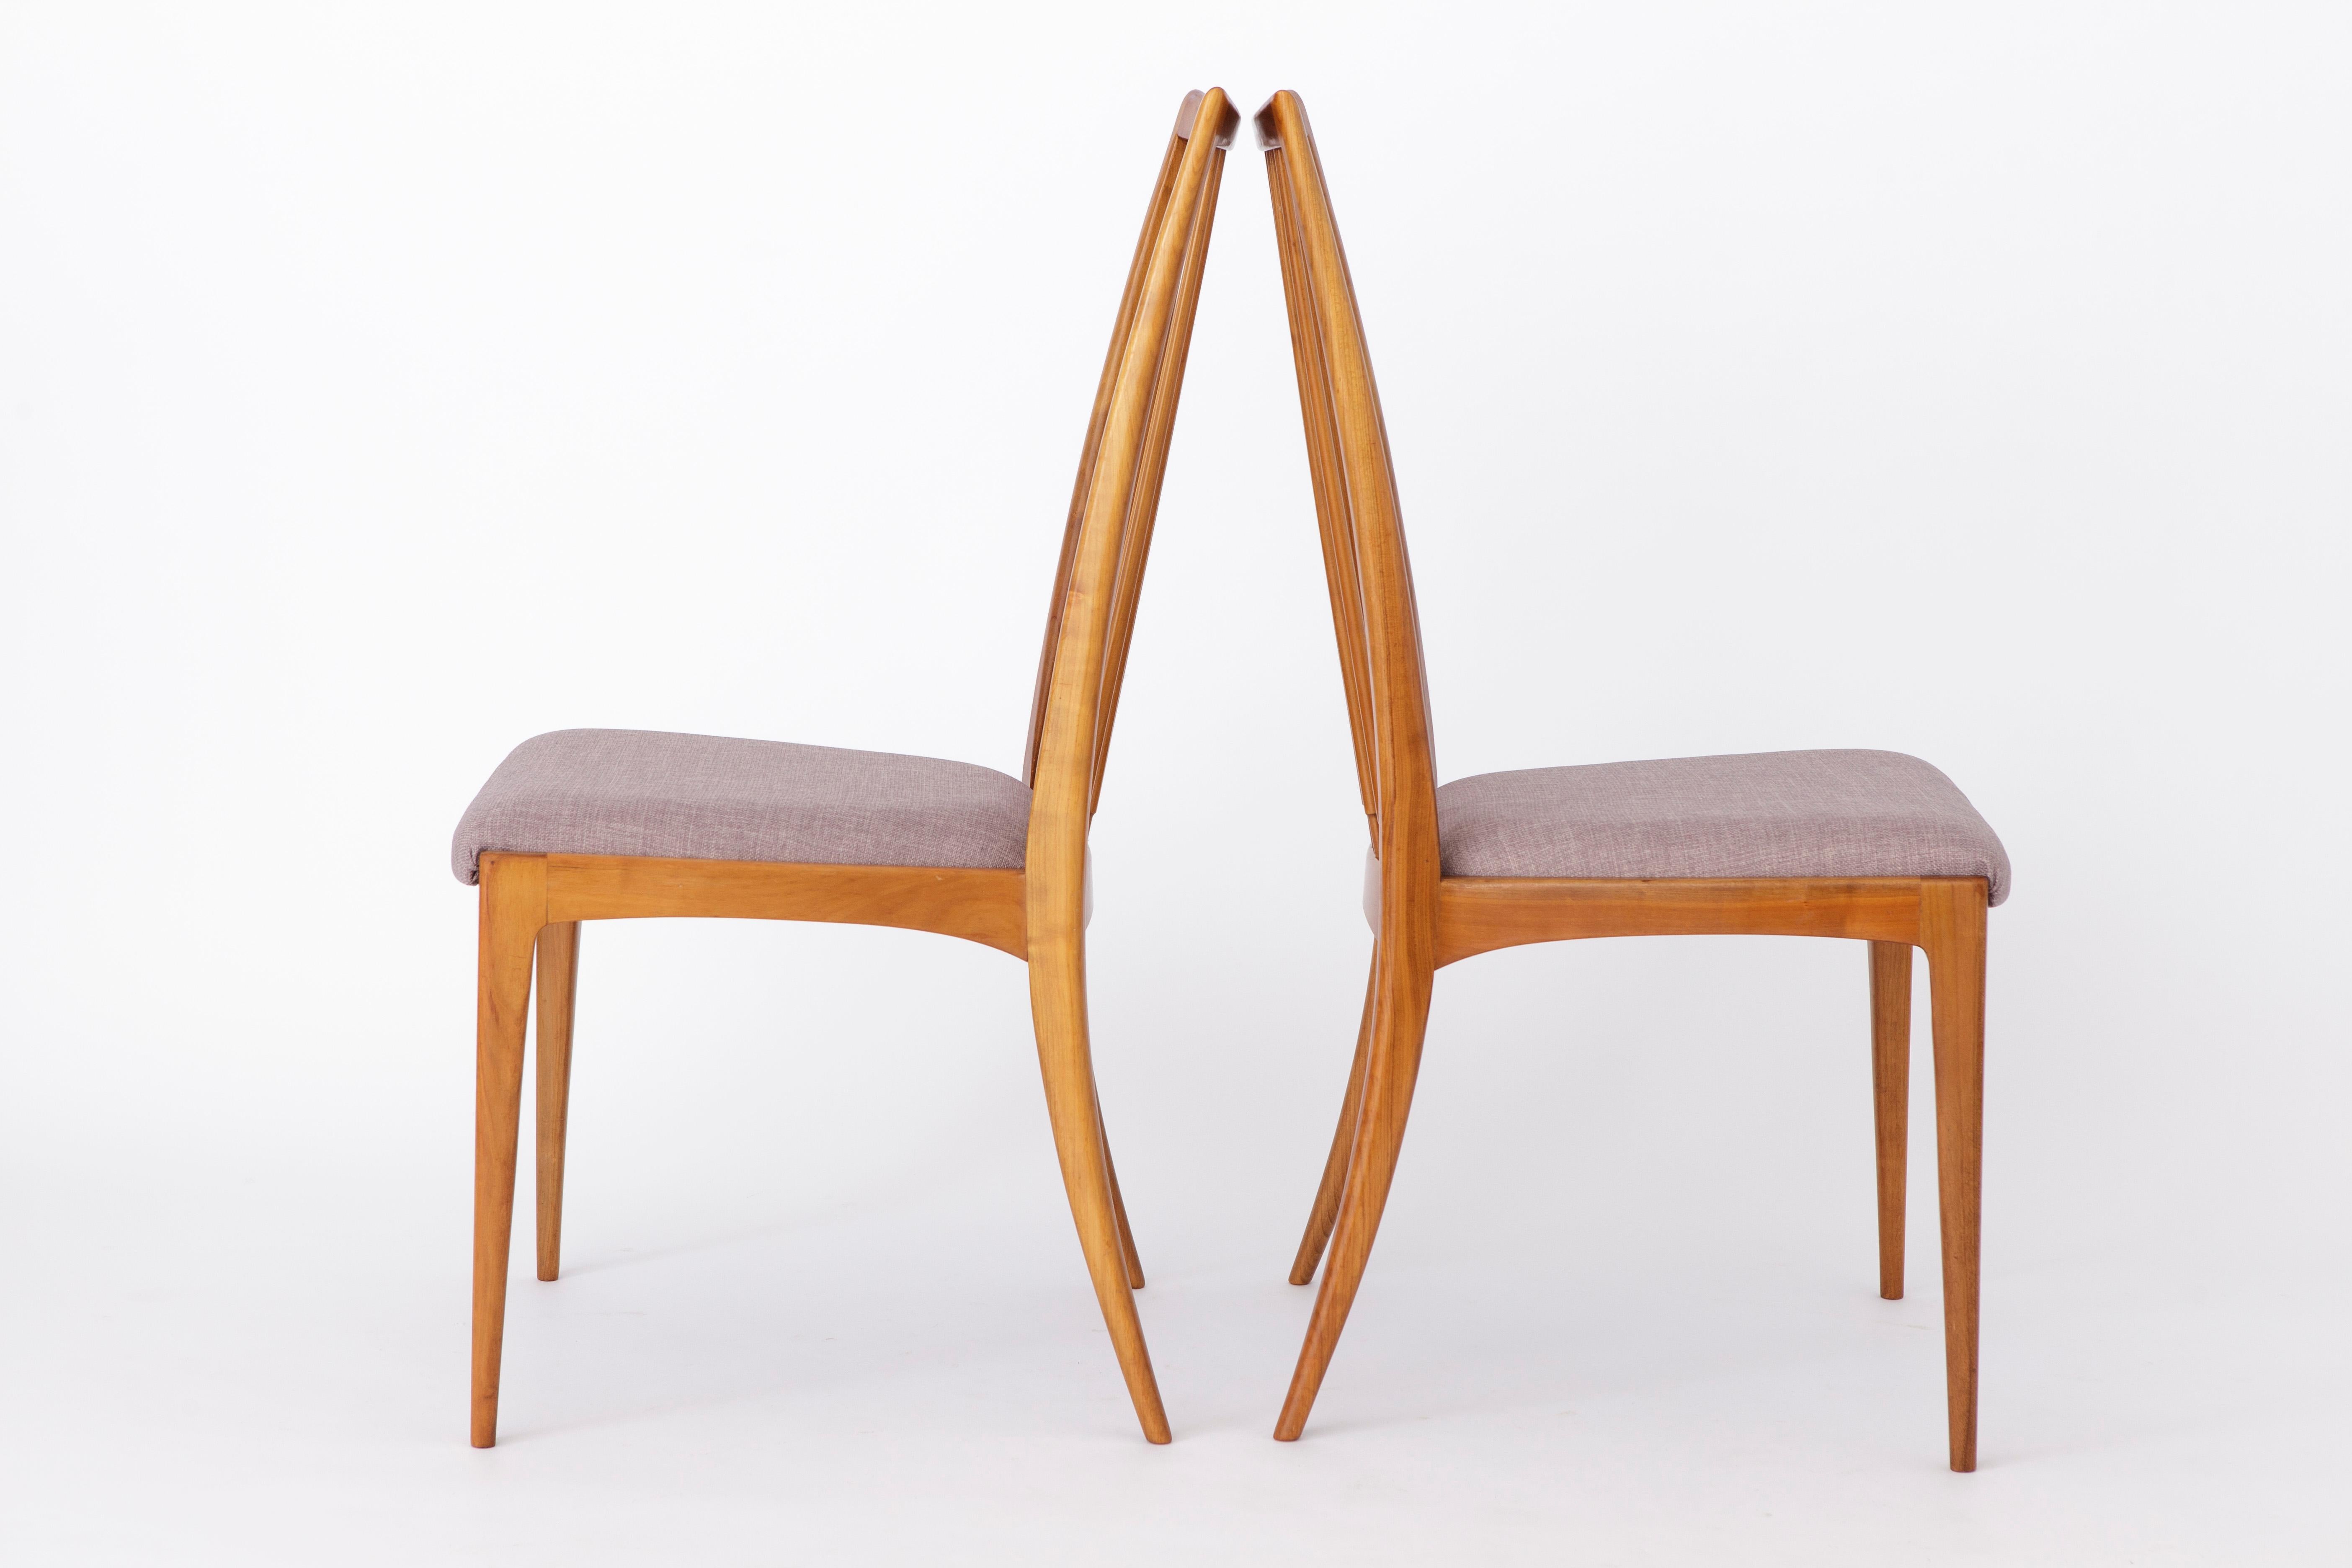 2 Vintage Chairs 1960s by Ernst Martin Dettinger, Germany In Good Condition For Sale In Hannover, DE